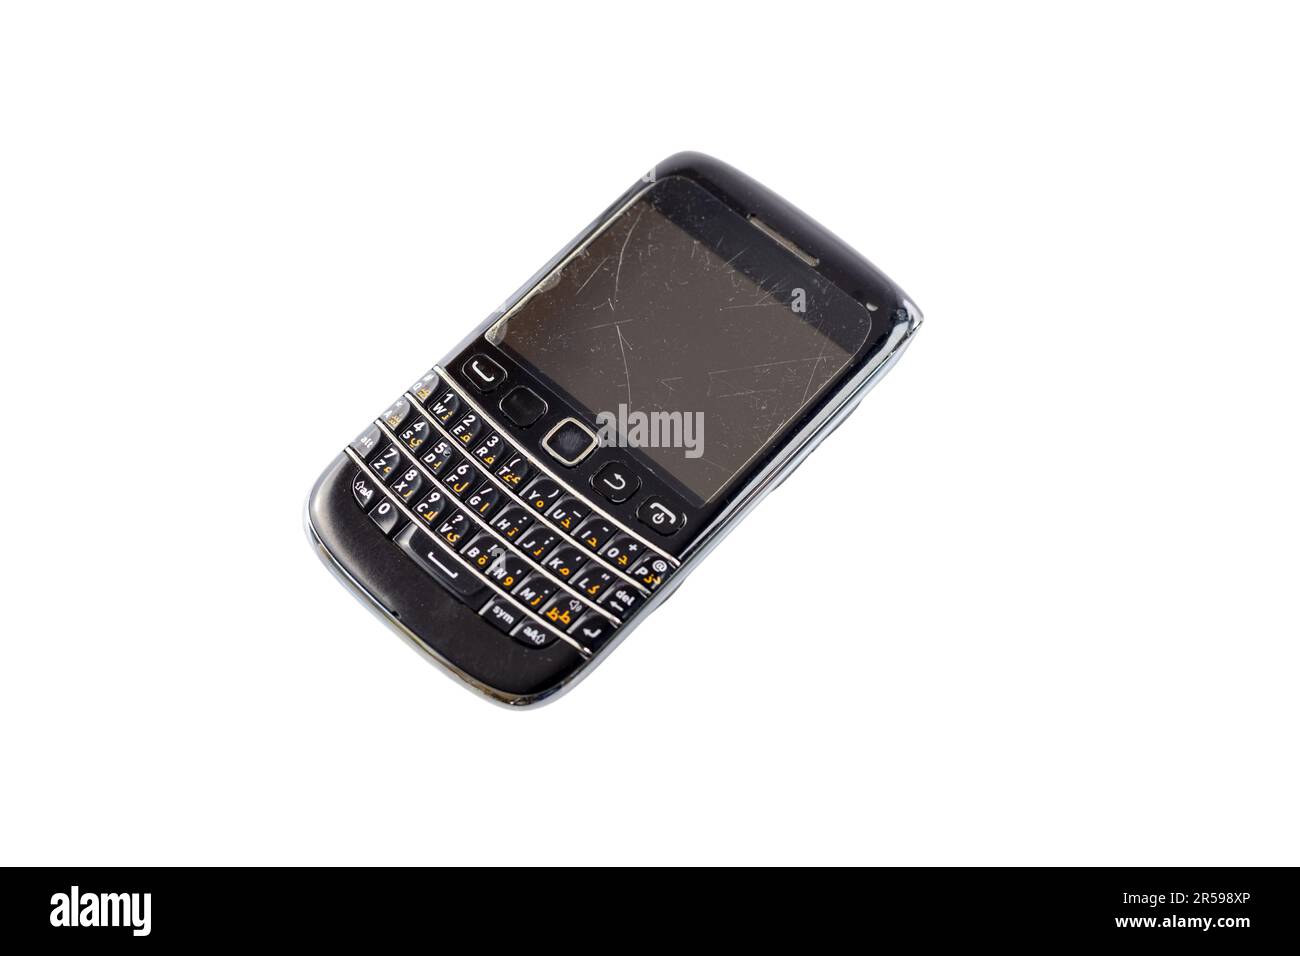 Used Blackberry smartphone with QWERTY keyboard isolated on a white background with copy space Stock Photo